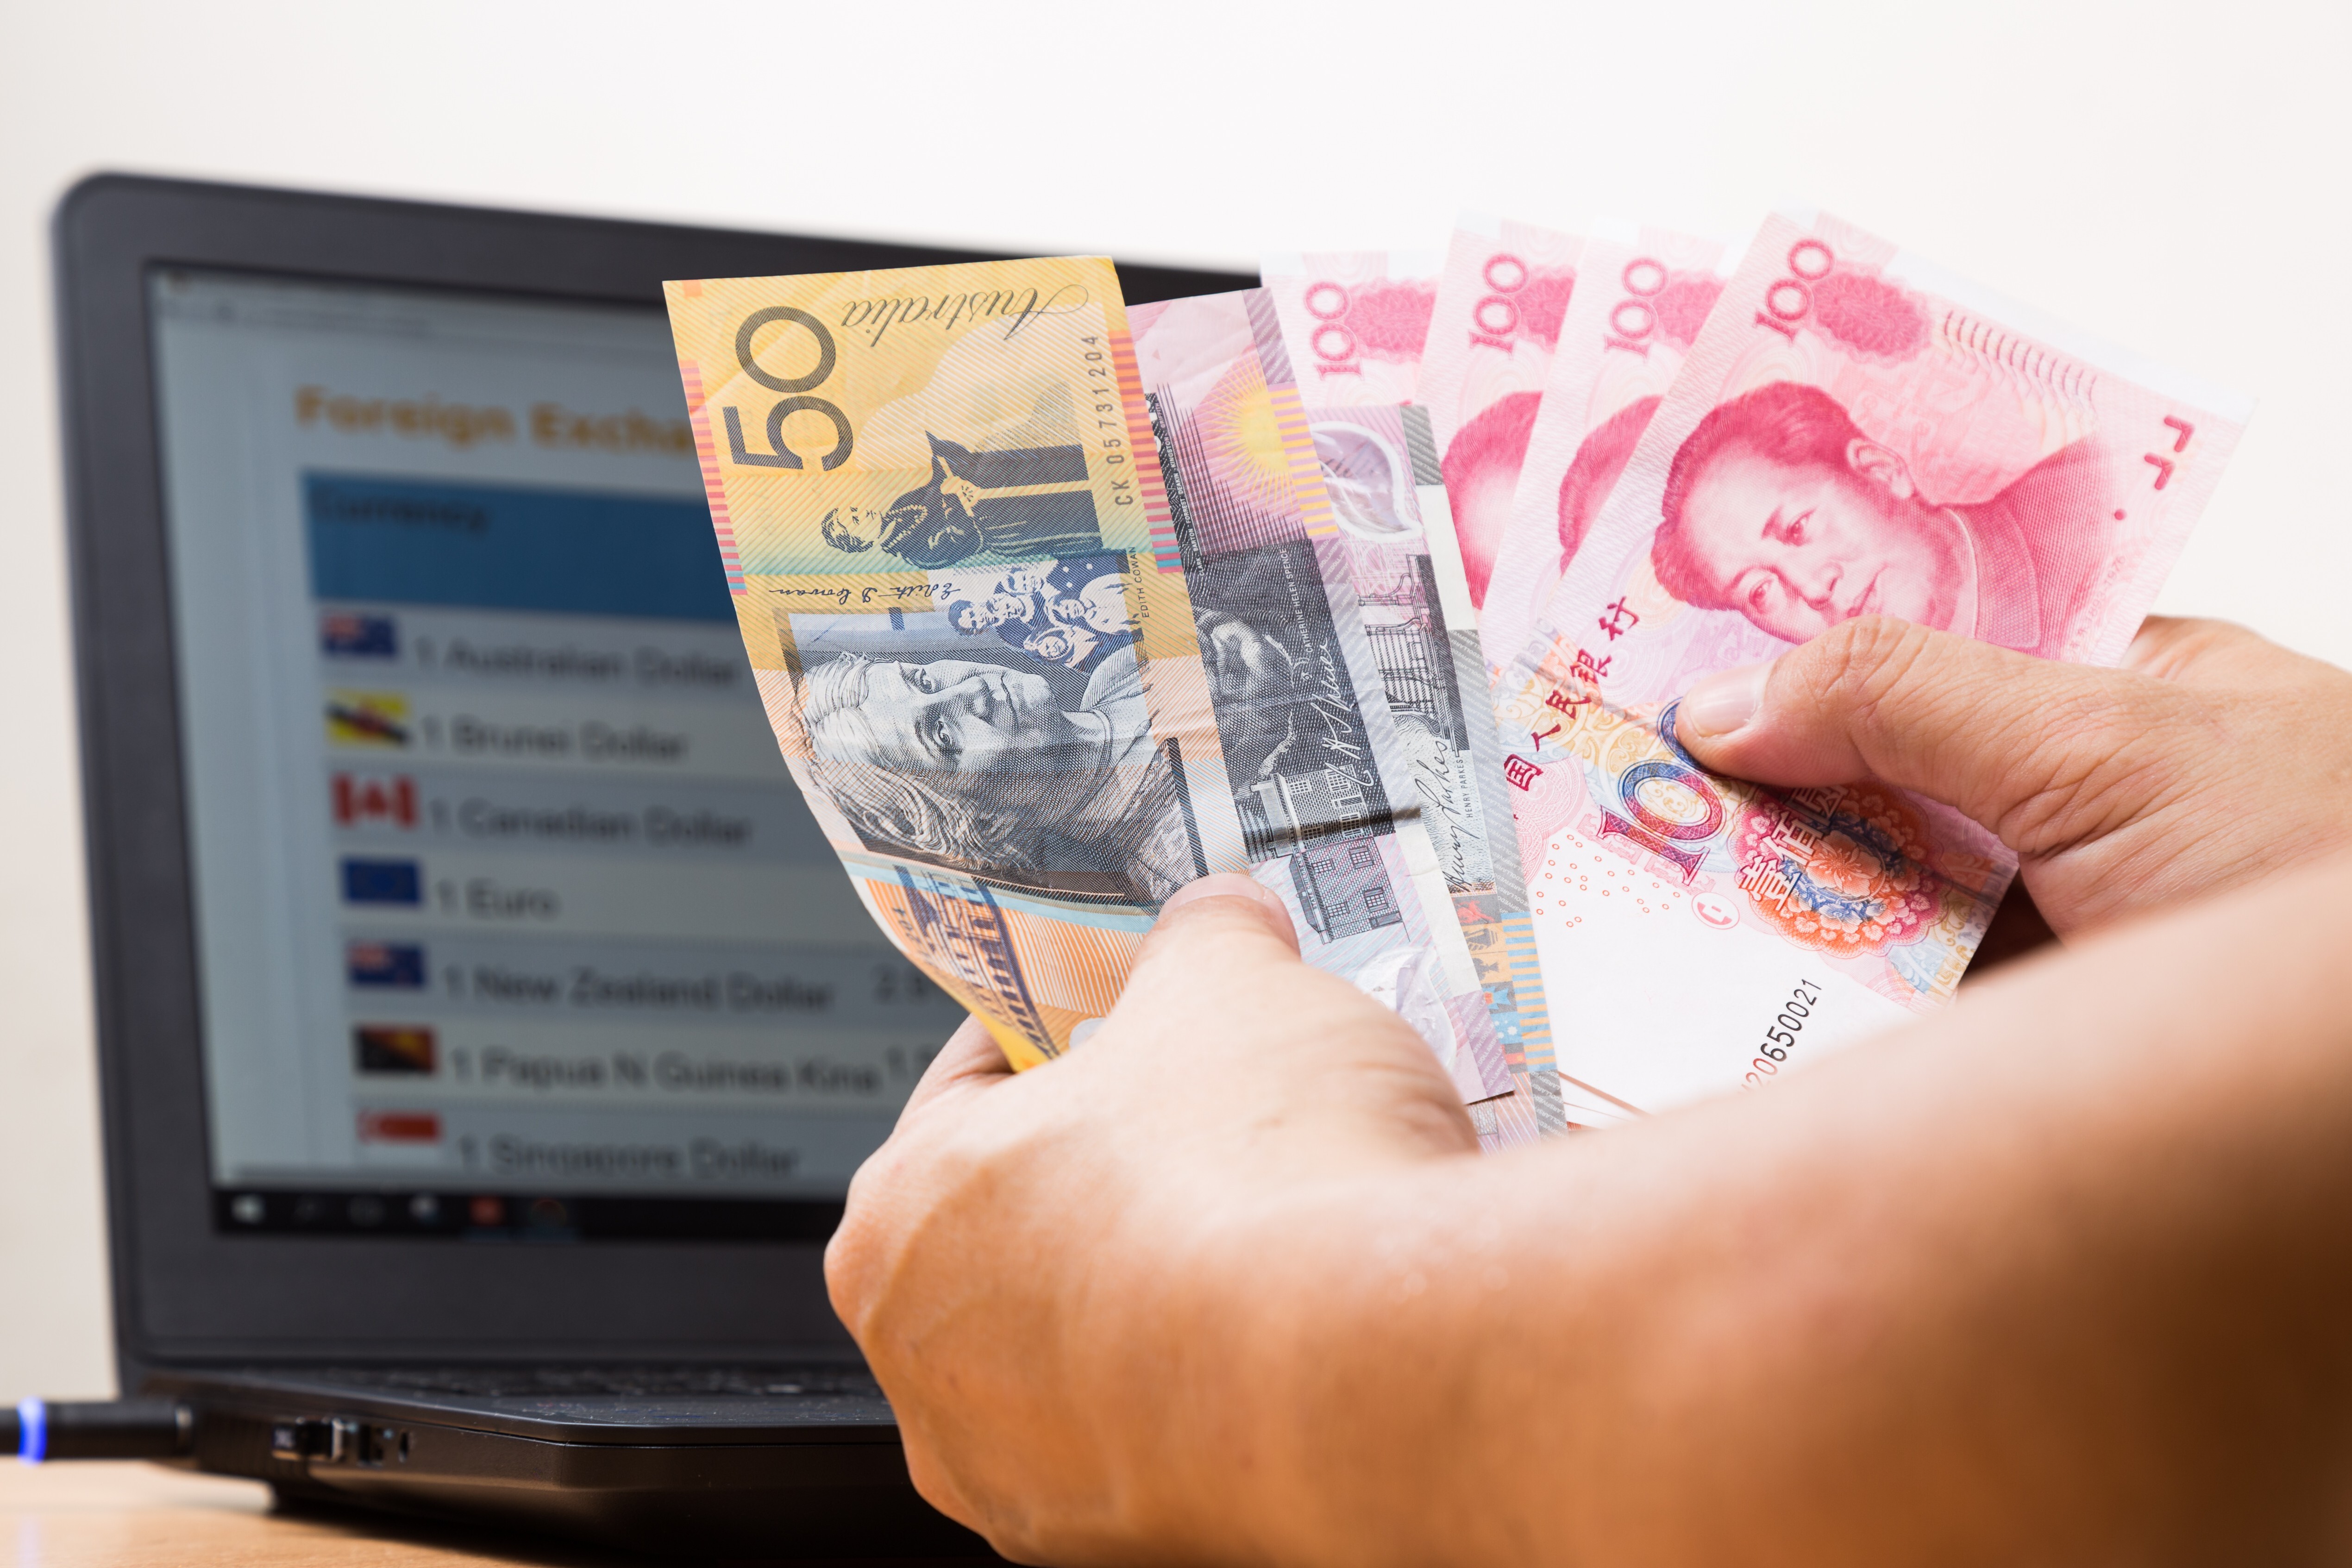 The Australian dollar was the worst performer among Group of 10 currencies last month. Photo: Getty Images